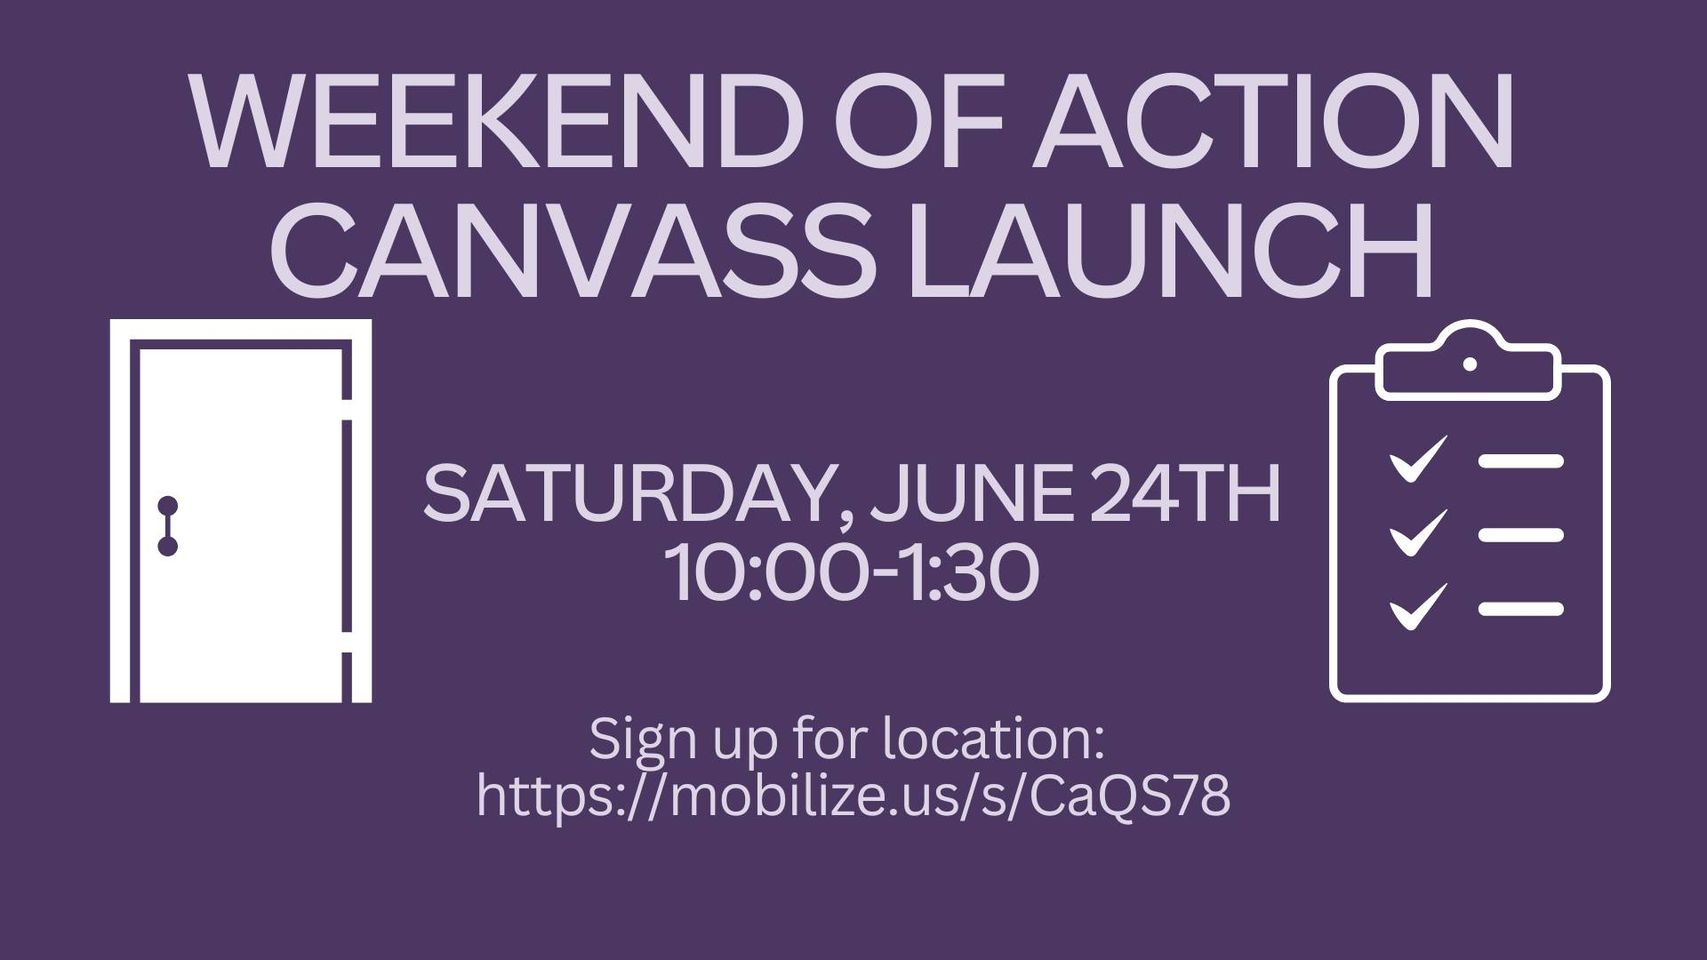 2023 Weekend of Action Canvass Launch